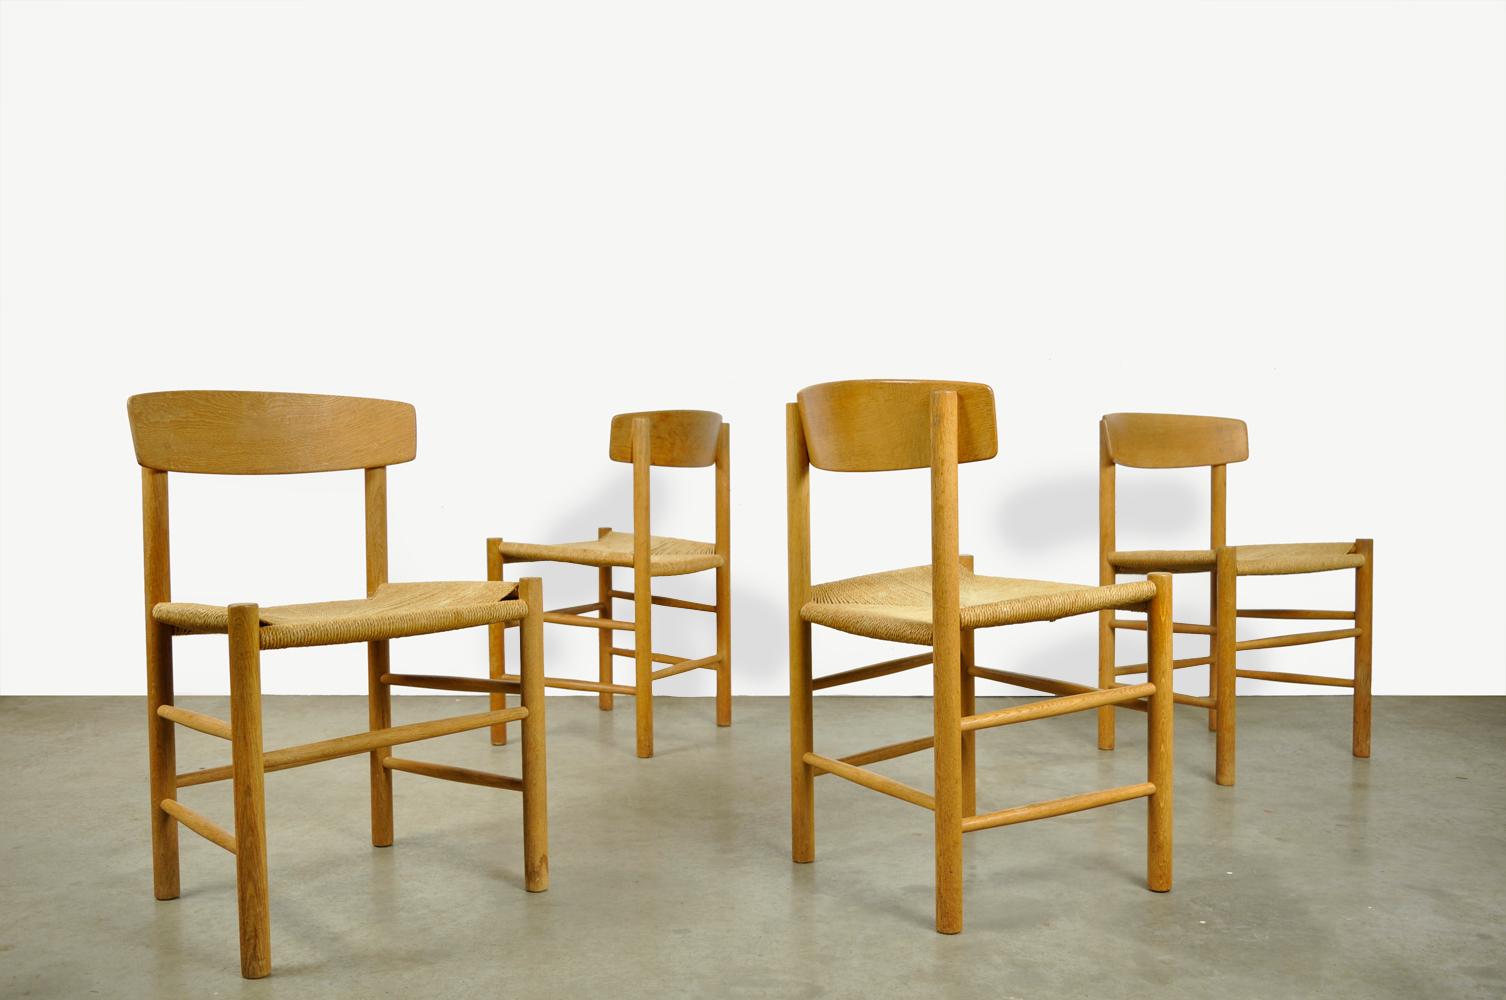 Mid-20th Century Original Oak Dining Chairs J39, by Børge Mogensen for F.D.B. Mobler, 1960